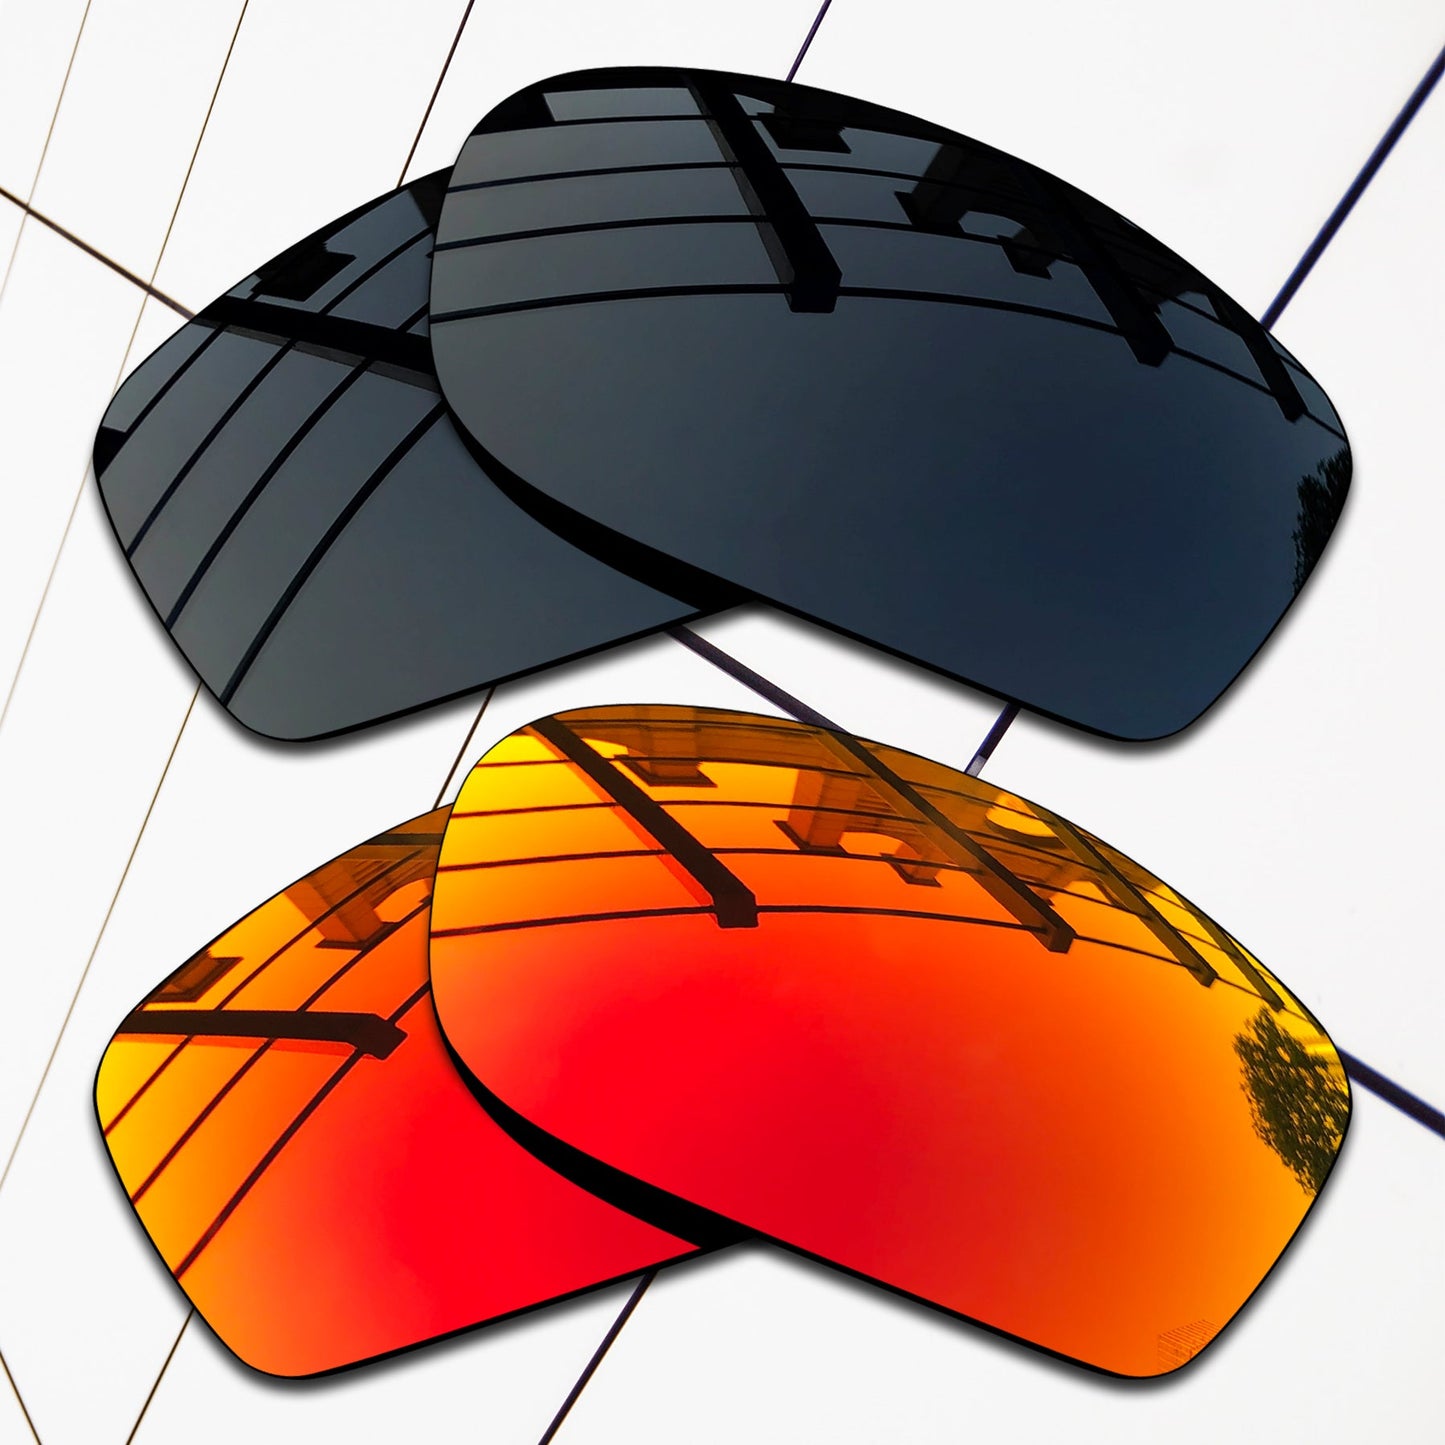 Polarized Replacement Lenses for Oakley Fives 3.0 Sunglasses